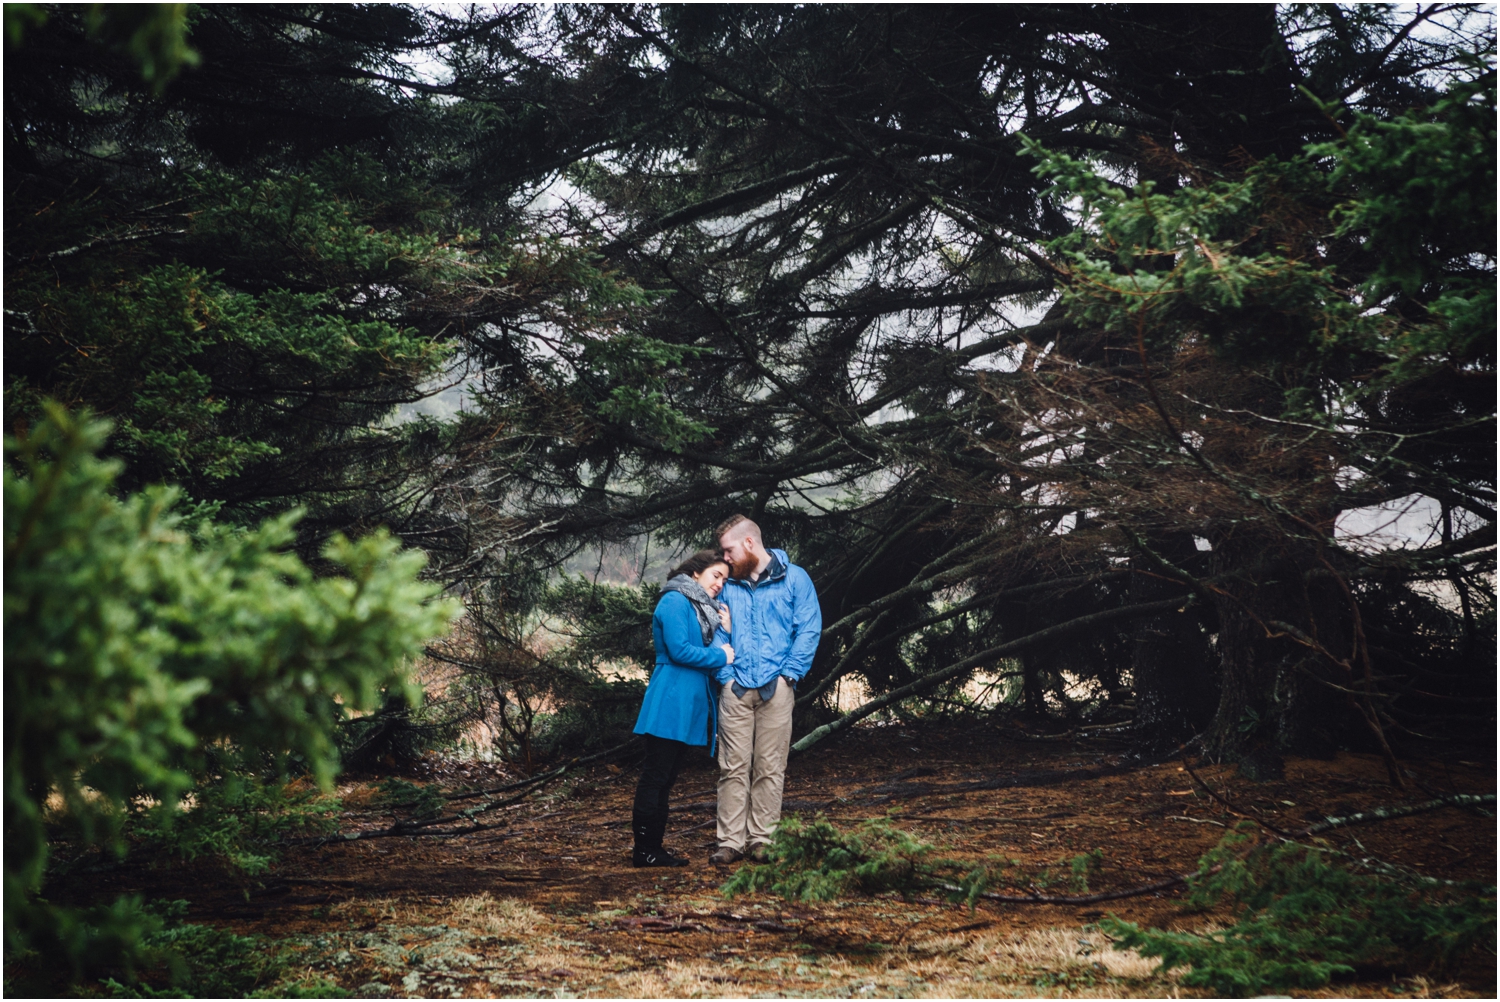 katy-sergent-photography-grayson-highlands-engagement-session-mouth-of-wilson-virginia-damascus-appalachian-trail-tennessee-wedding-elopement_0006.jpg